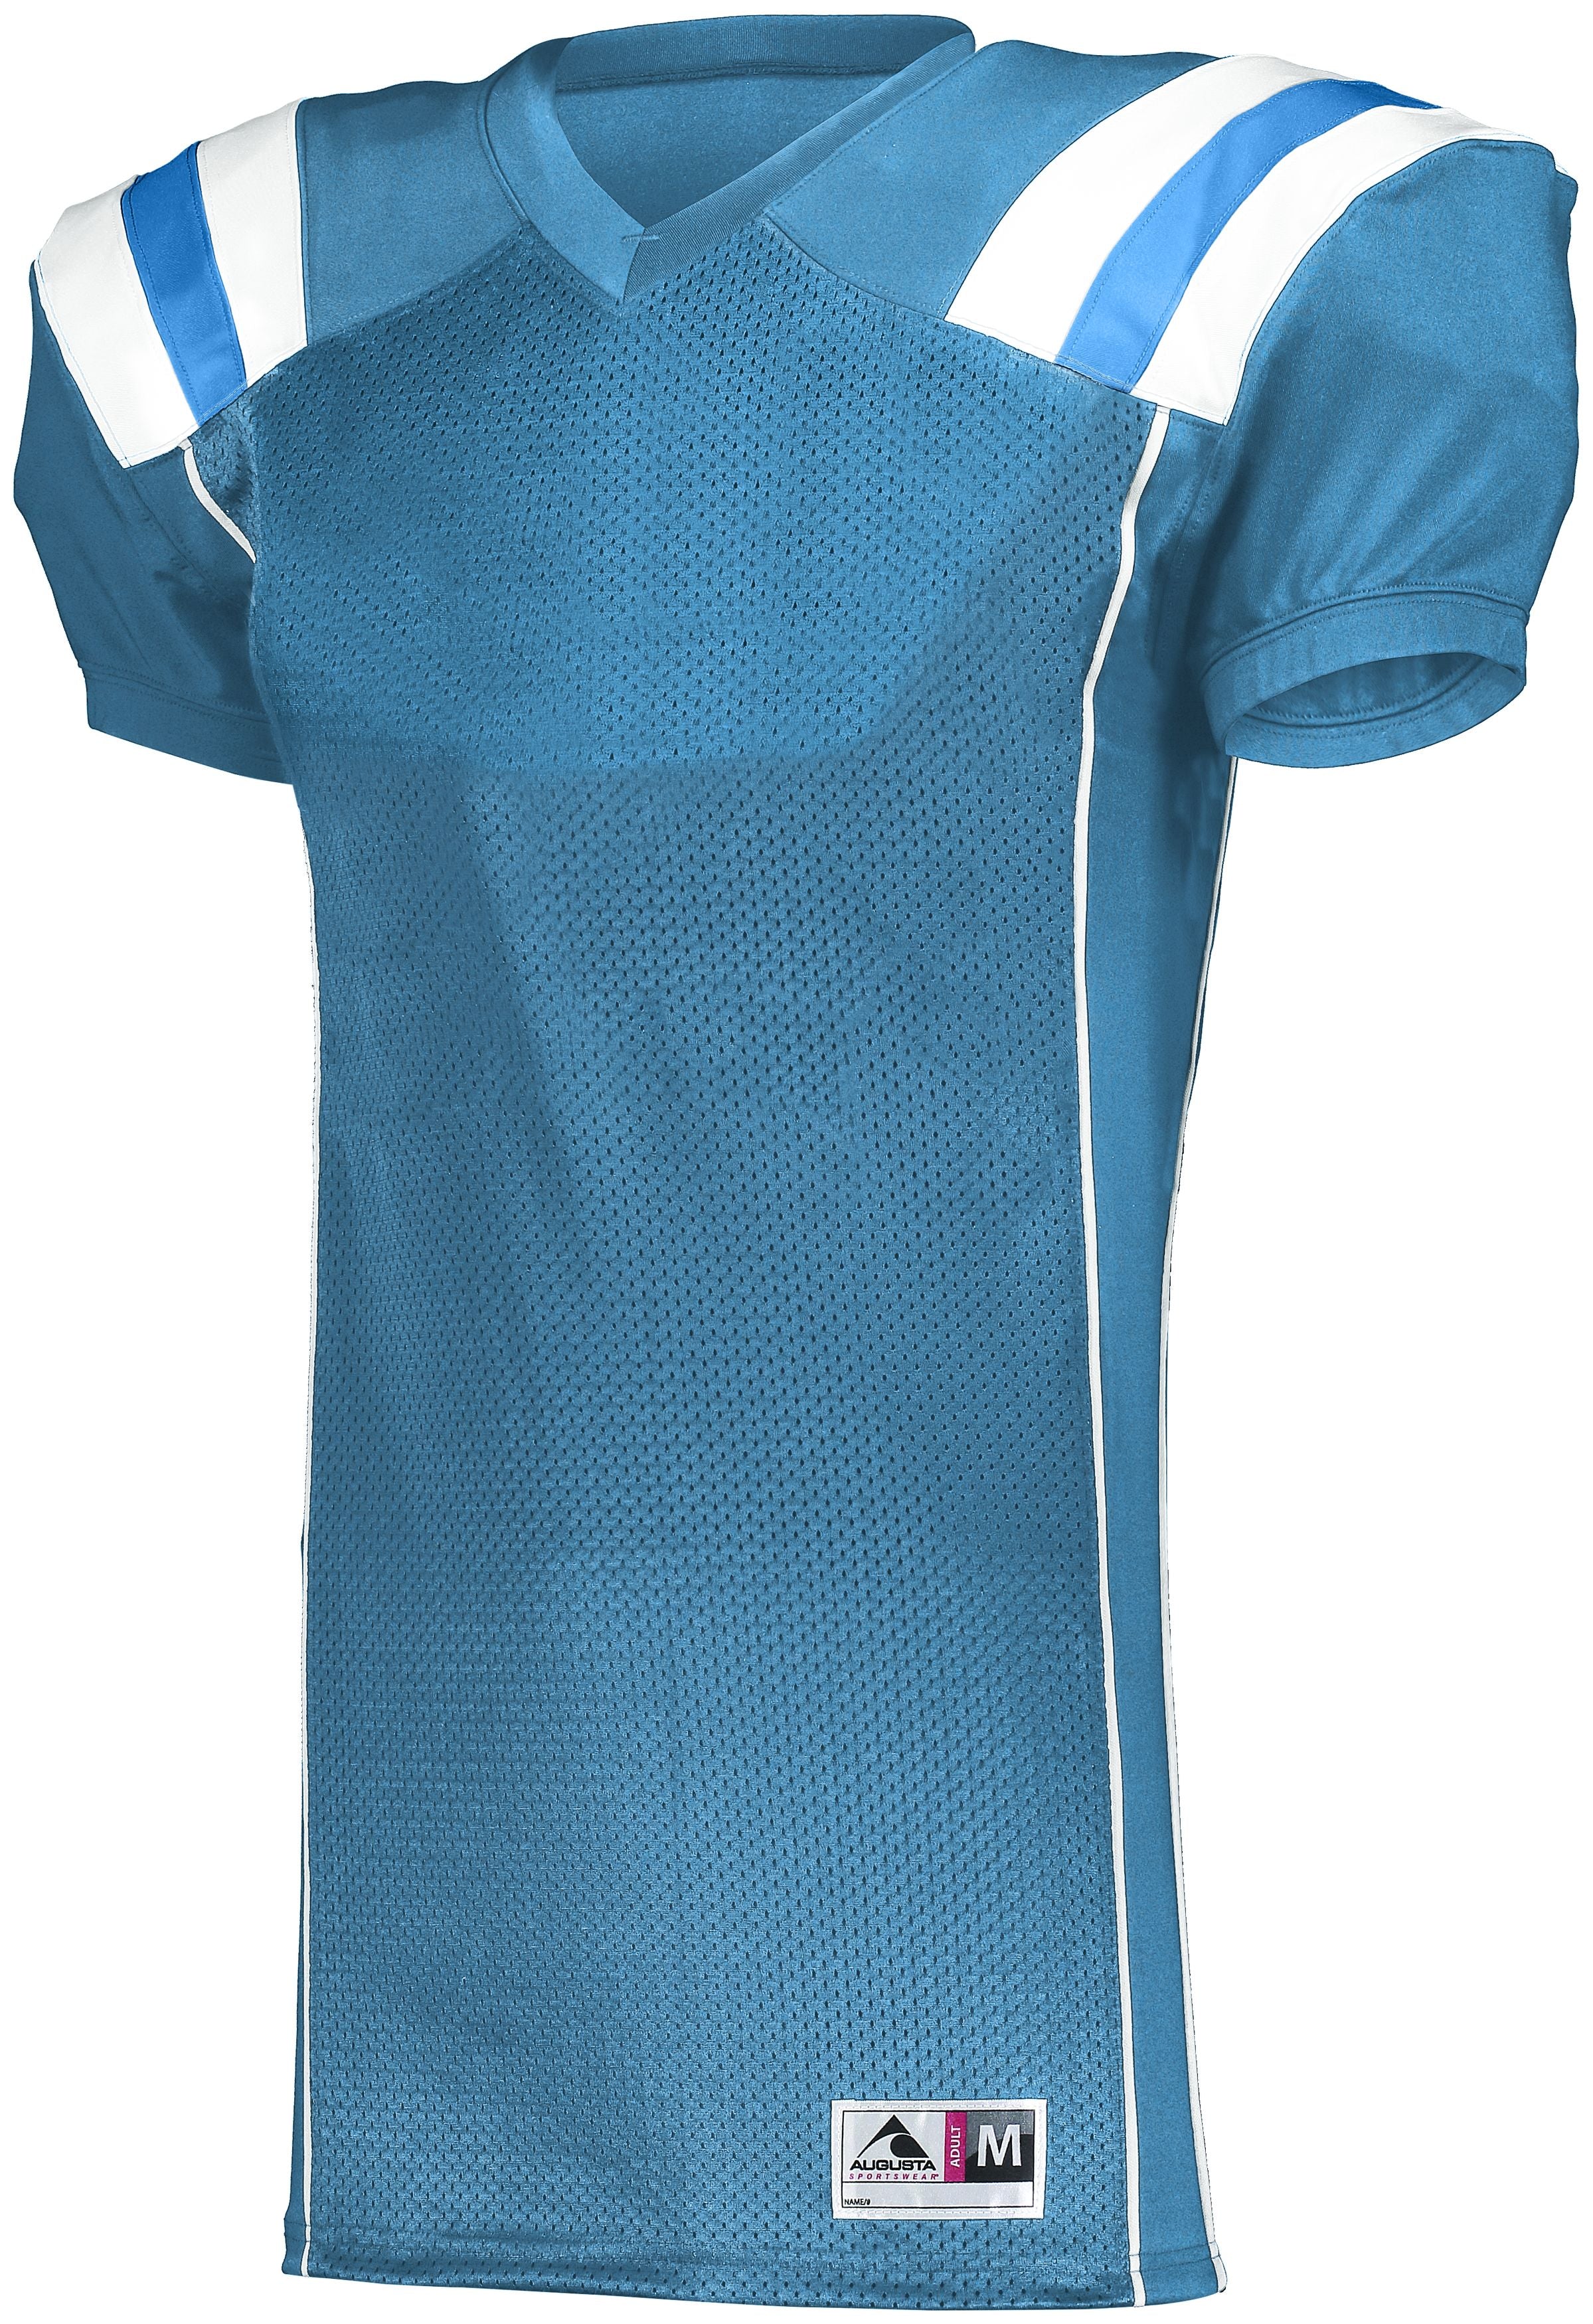 Augusta Sportswear Youth Tform Football Jersey in Columbia Blue/White  -Part of the Youth, Youth-Jersey, Augusta-Products, Football, Shirts, All-Sports, All-Sports-1 product lines at KanaleyCreations.com